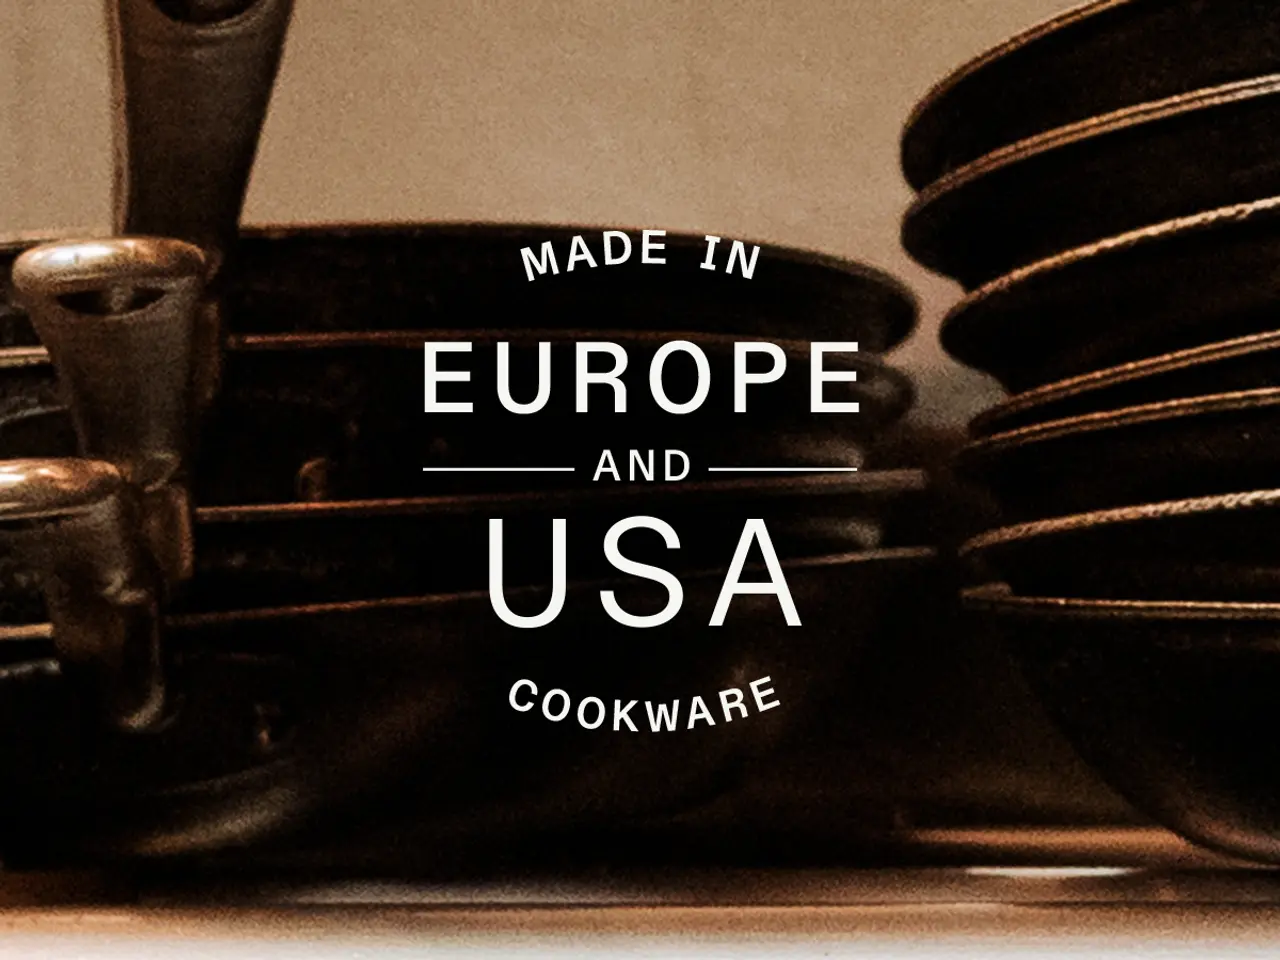 Stacked cookware with the text "Made in Europe and USA Cookware" superimposed on the image.